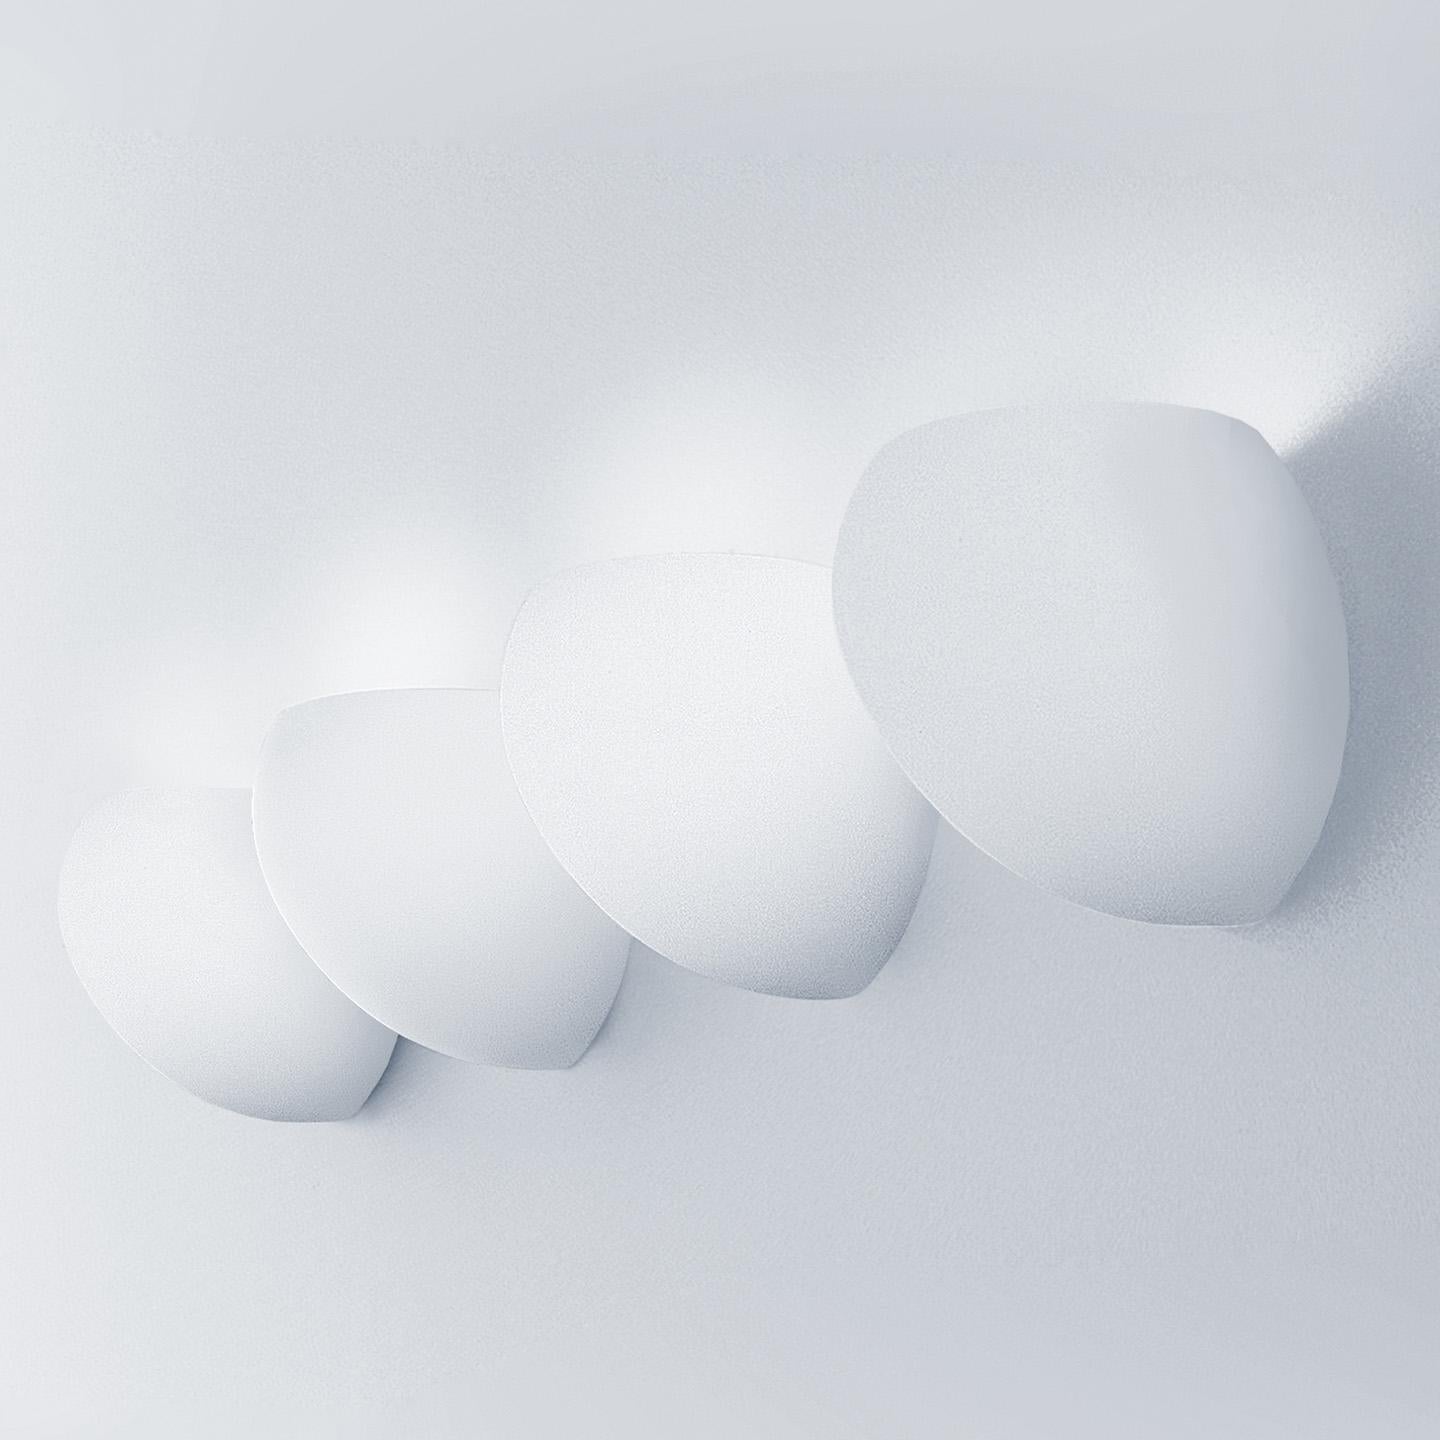 The Golf wall lamp is a whimsical, bestselling design from the historic Leucos design collection. Designed by Toso & Massari, the Golf collection includes a versatile array of pendants, wall and ceiling lamps. Each comes with the option of a hand